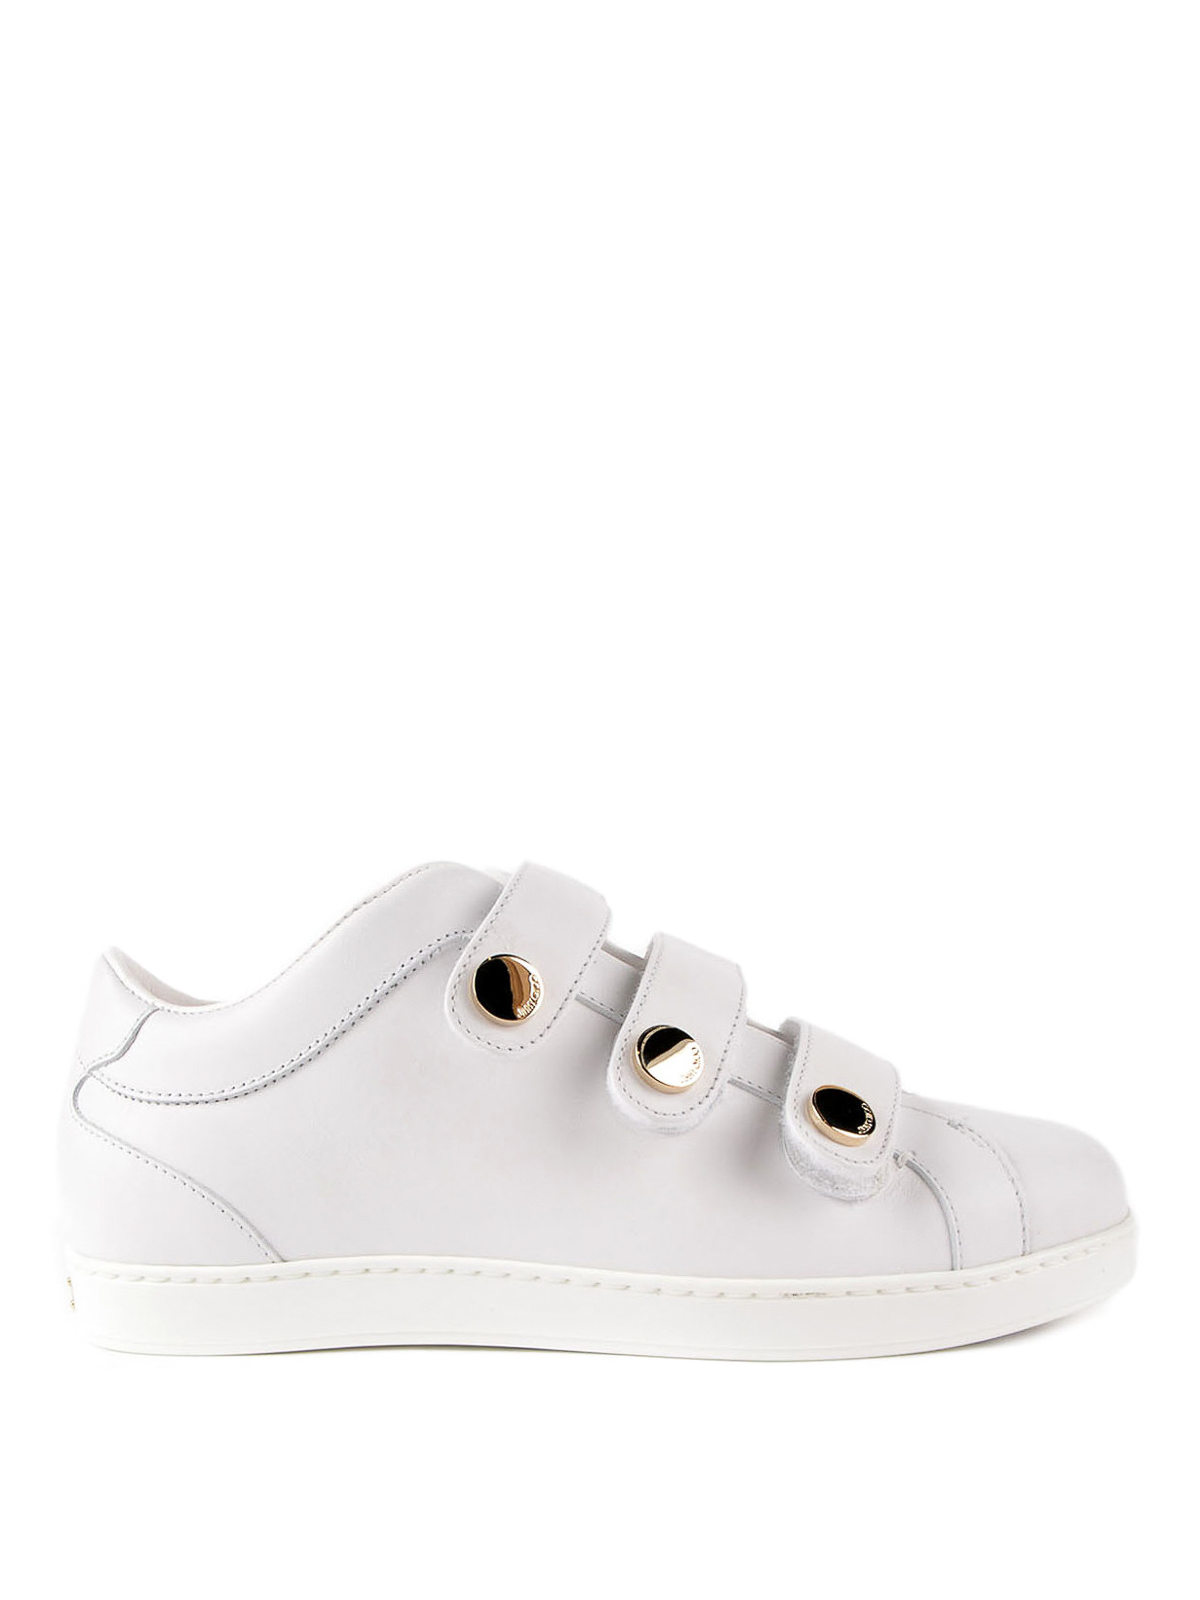 gå ind radiator Pelmel Trainers Jimmy Choo - NY sneakers - NYCLFWHITE | thebs.com [ikrix.com]